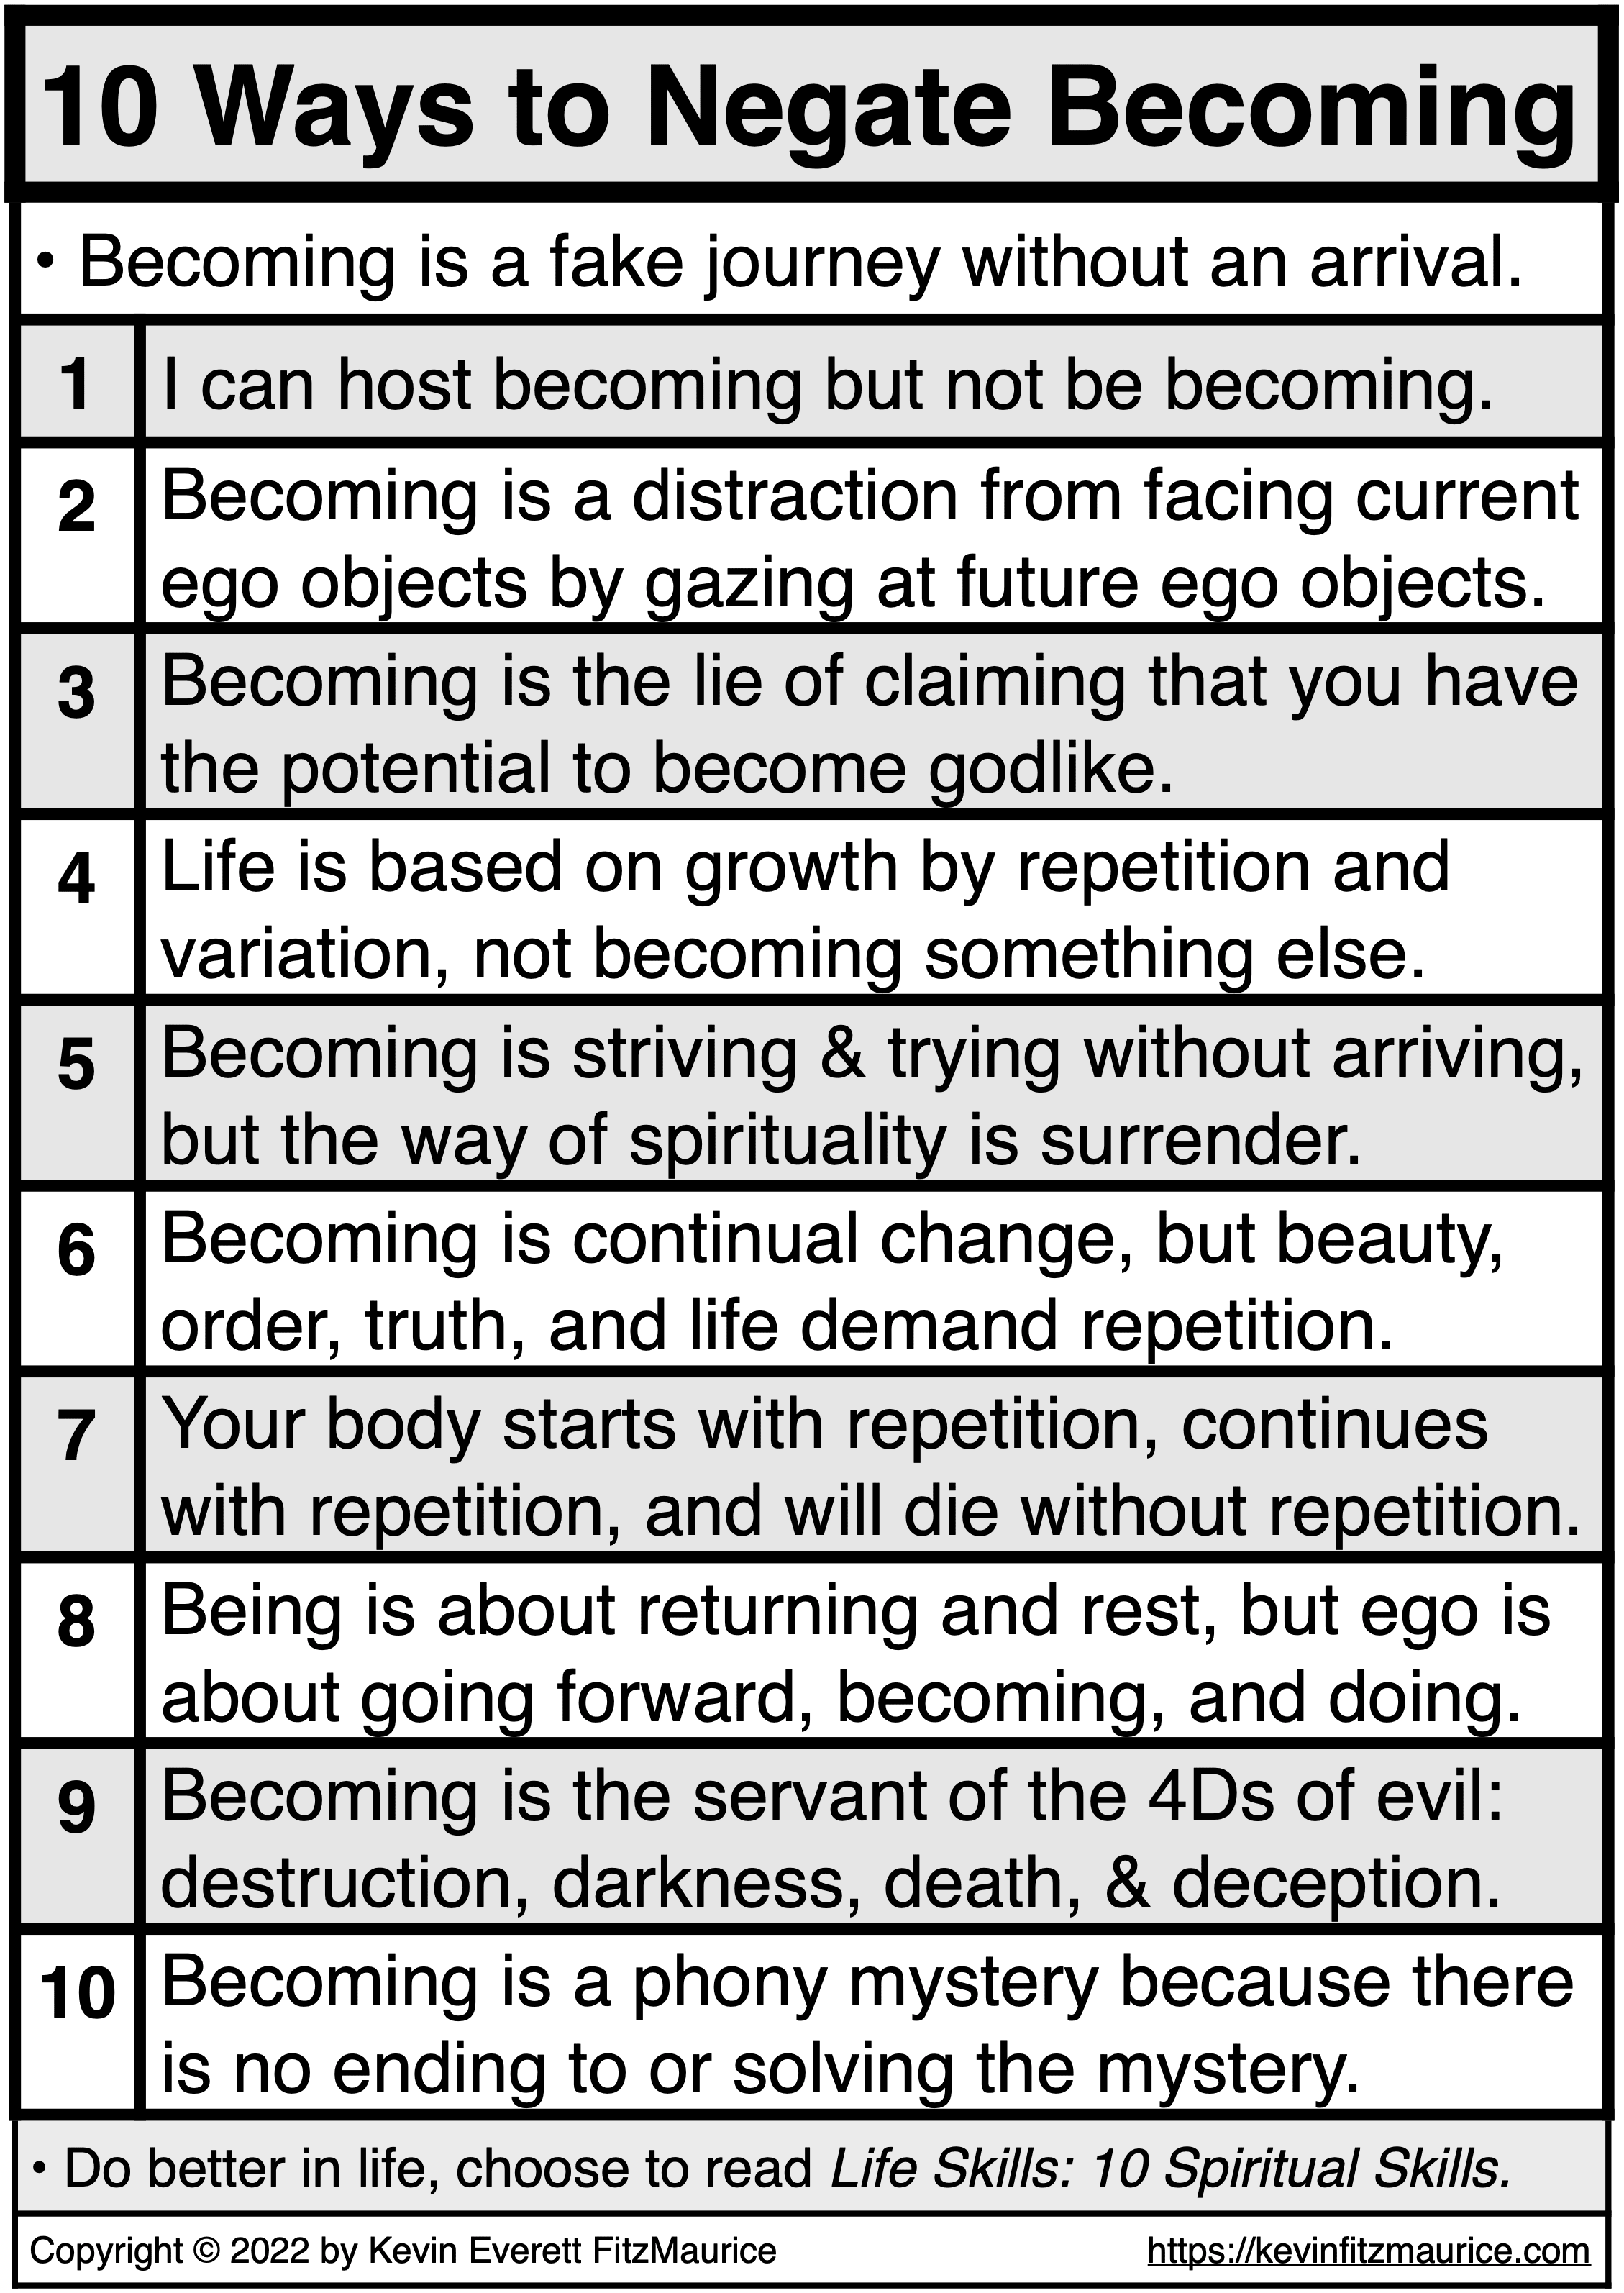 10 Ways to Negate Becoming